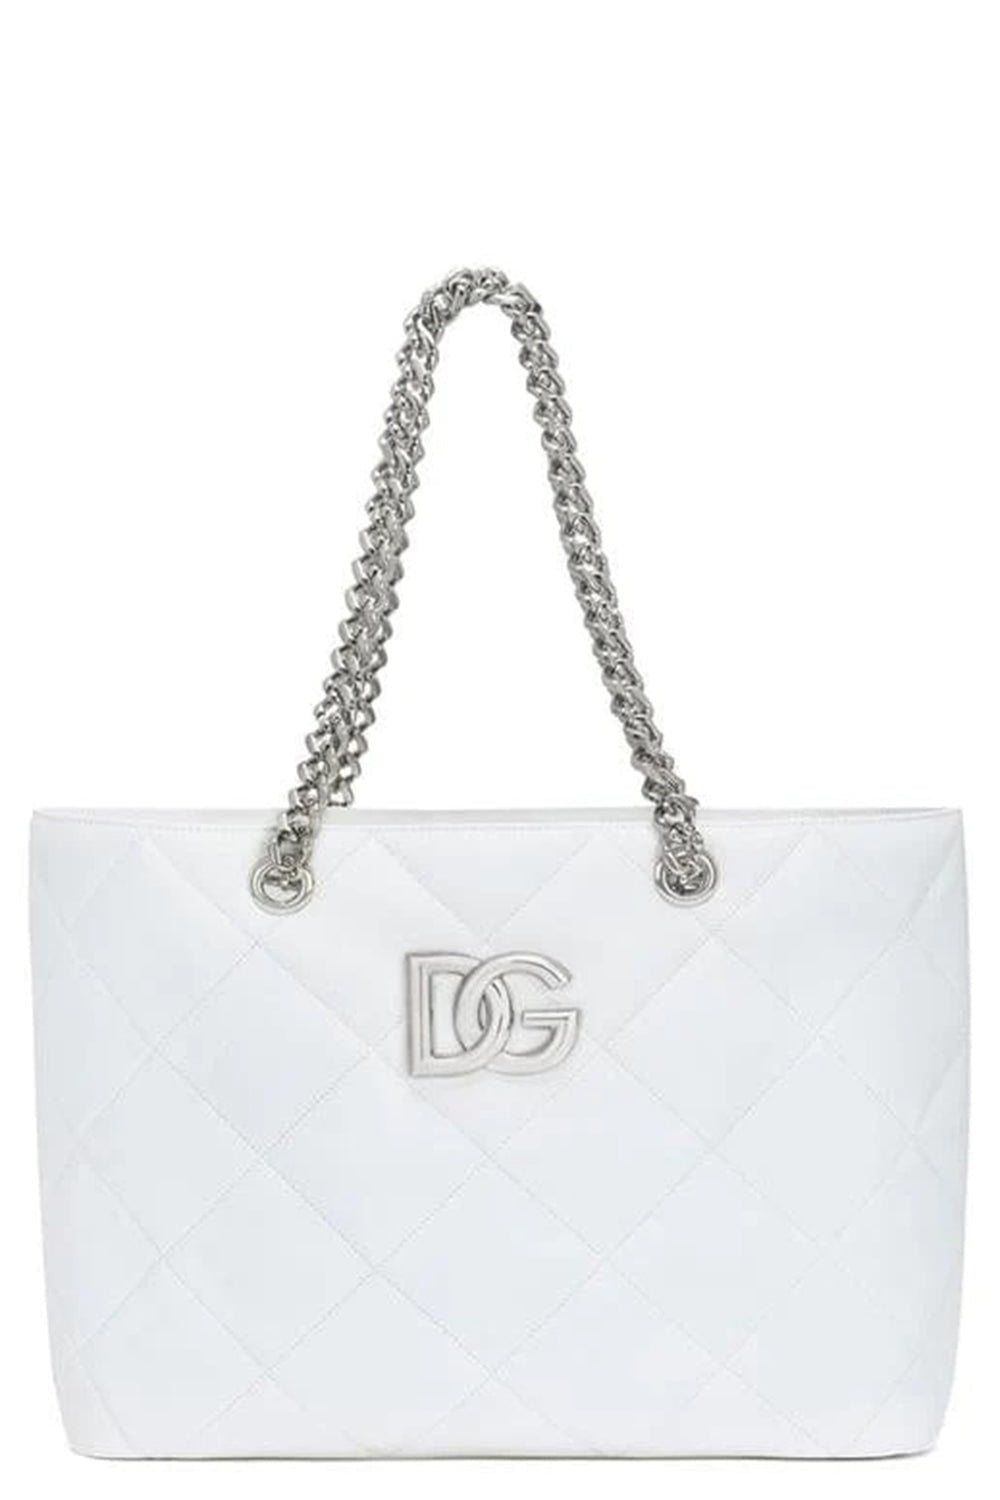 DOLCE & GABBANA-Quilted Tote With Chain Straps-BIANCO